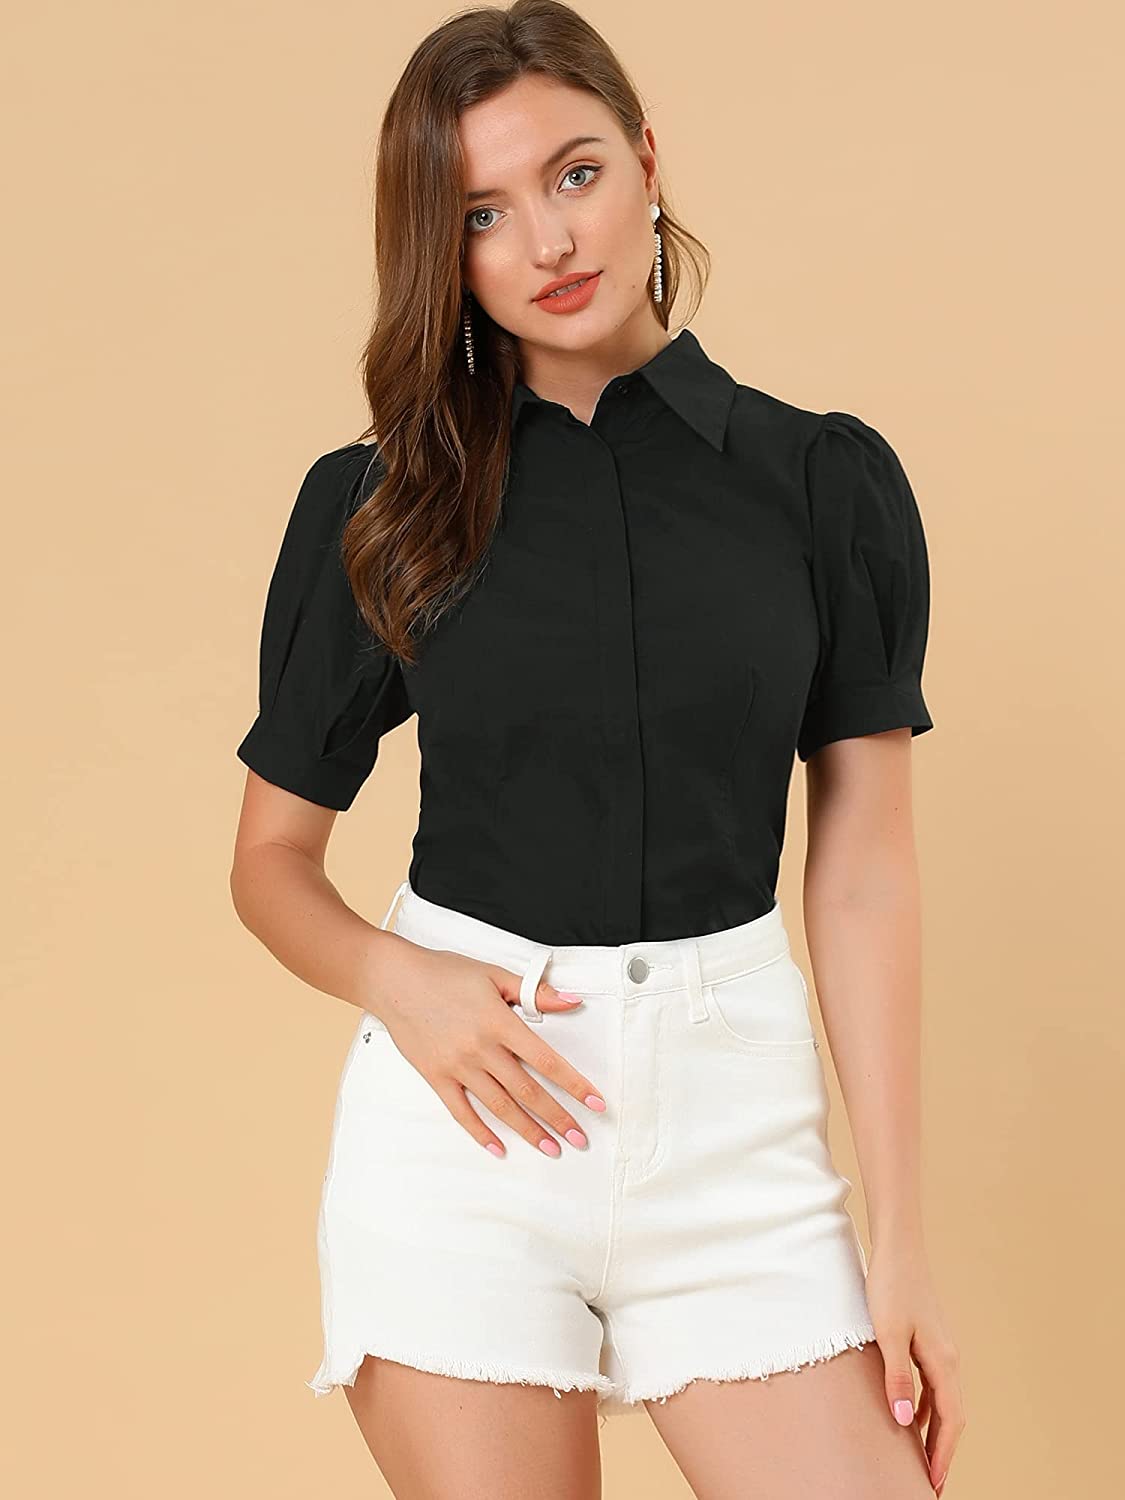 Solid Black Shirt for women